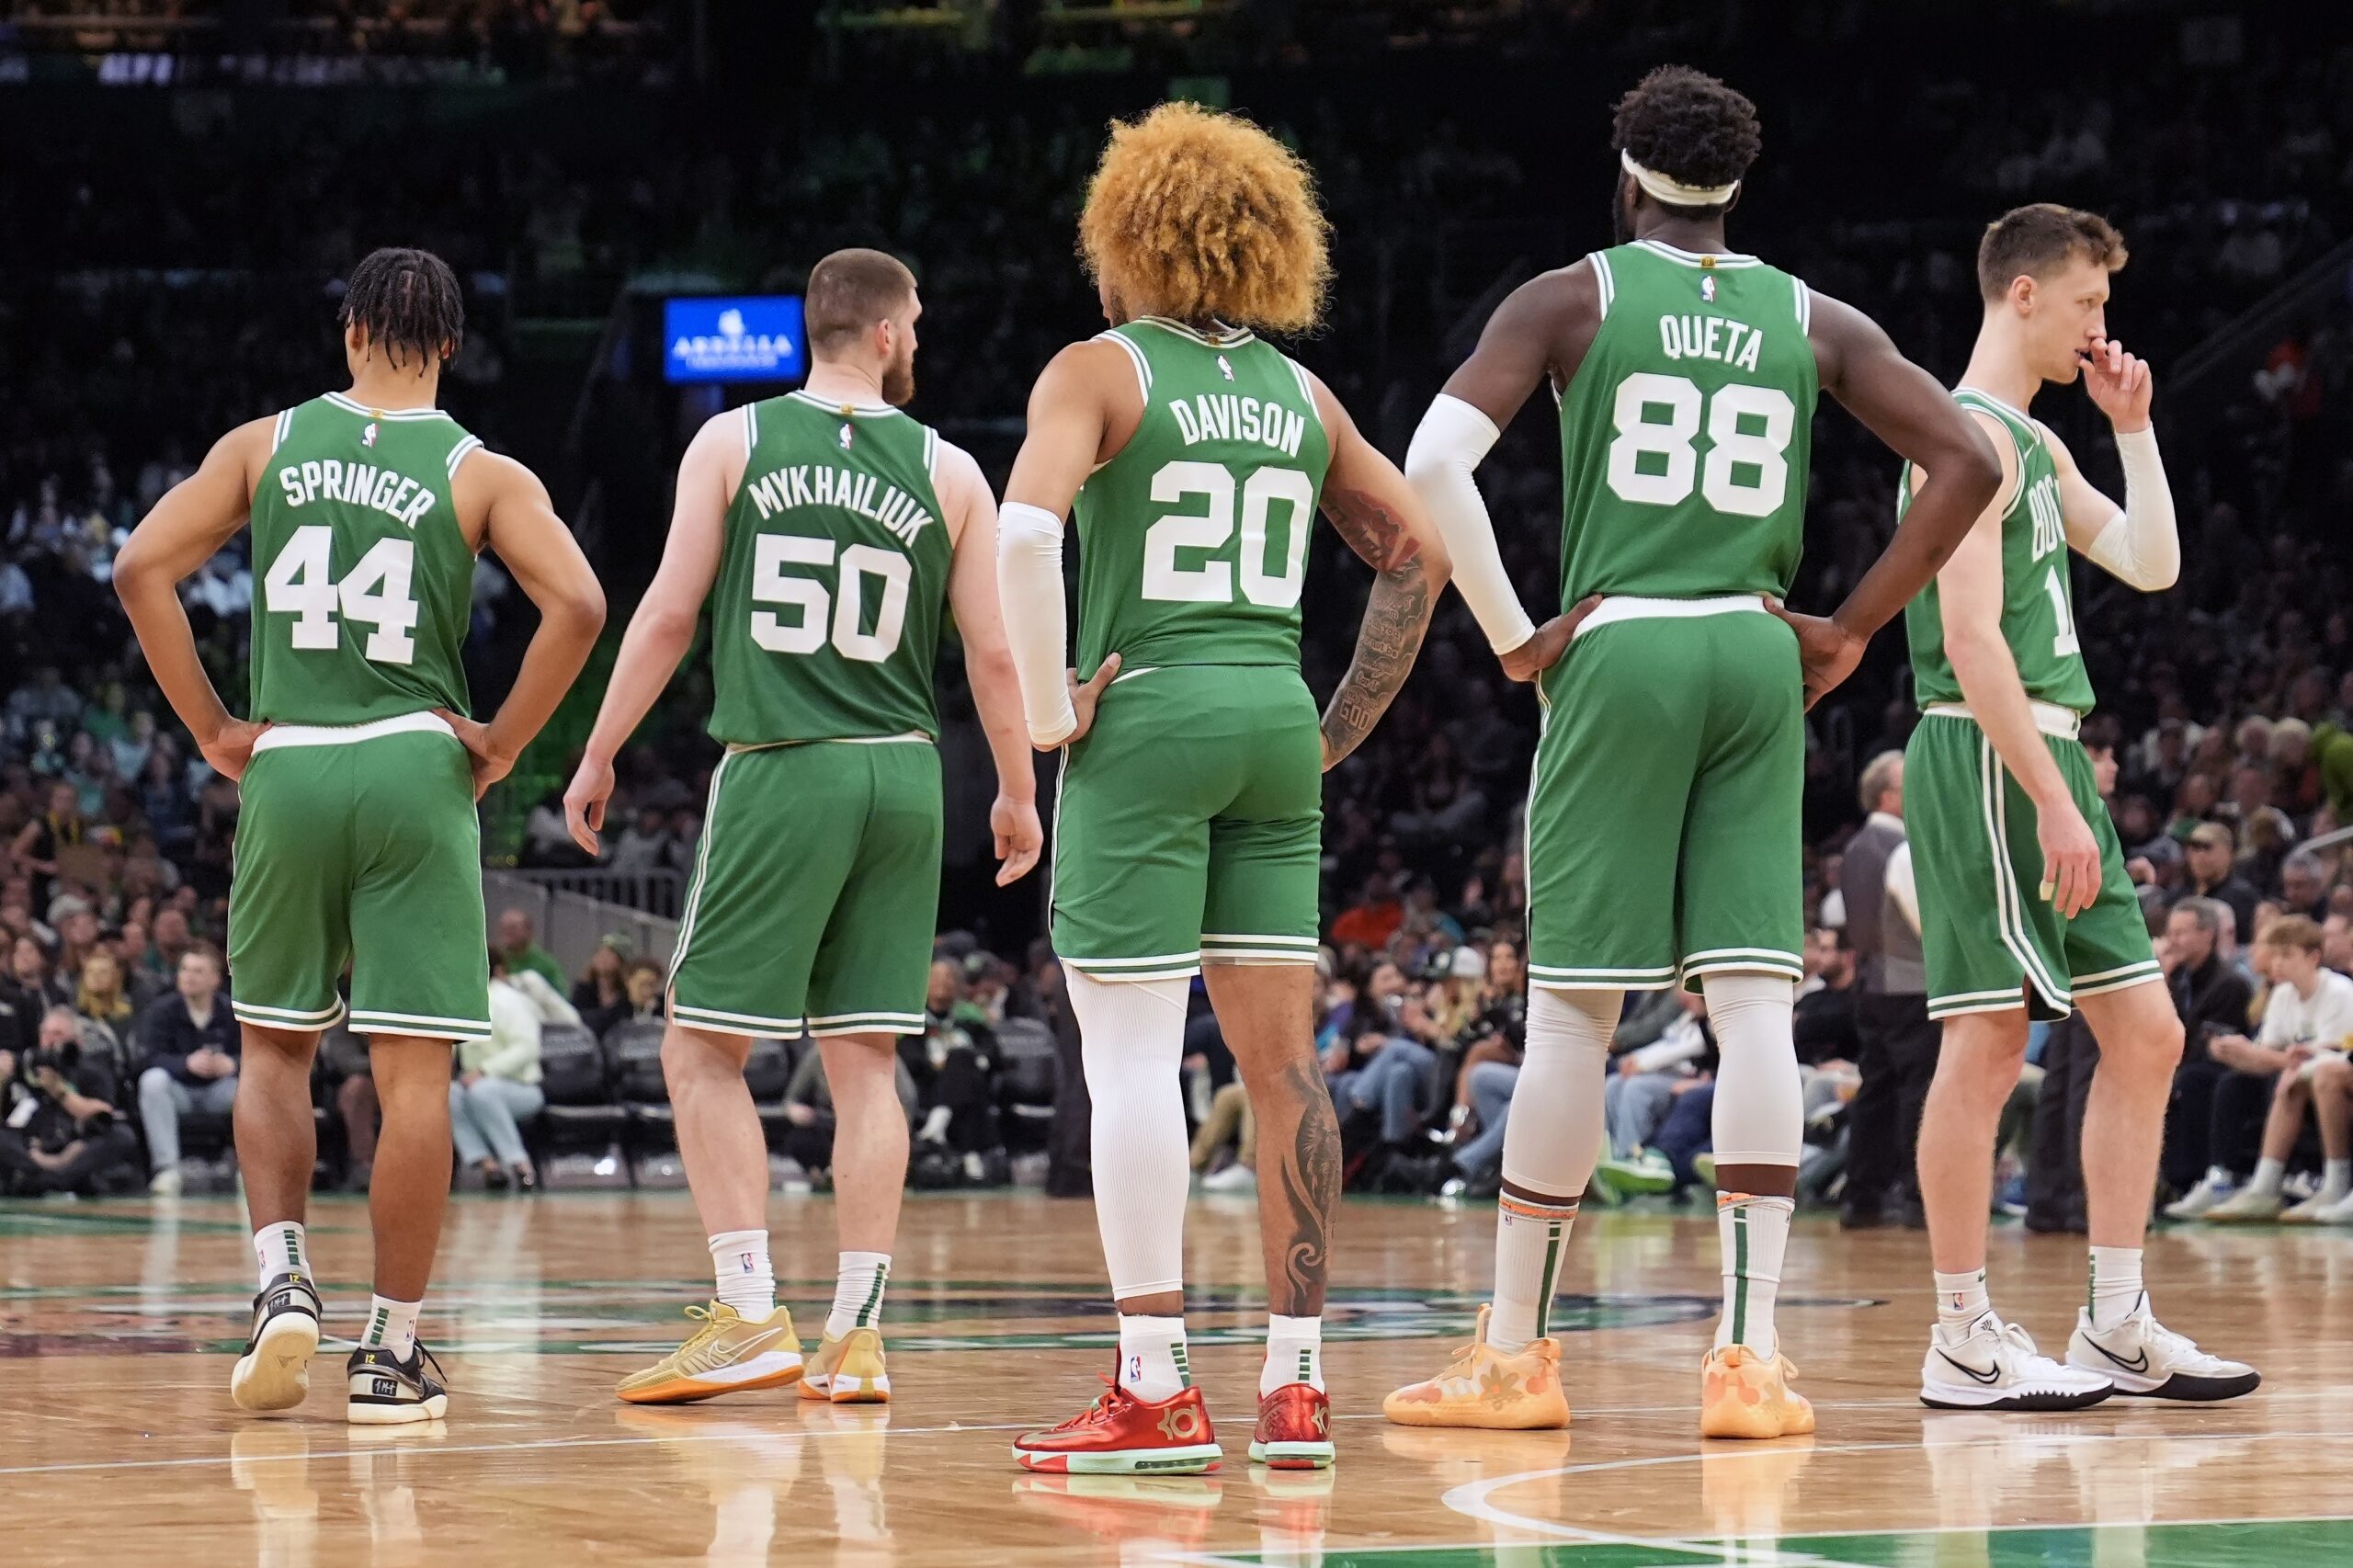 NBA: Only a championship will make season complete for Celtics